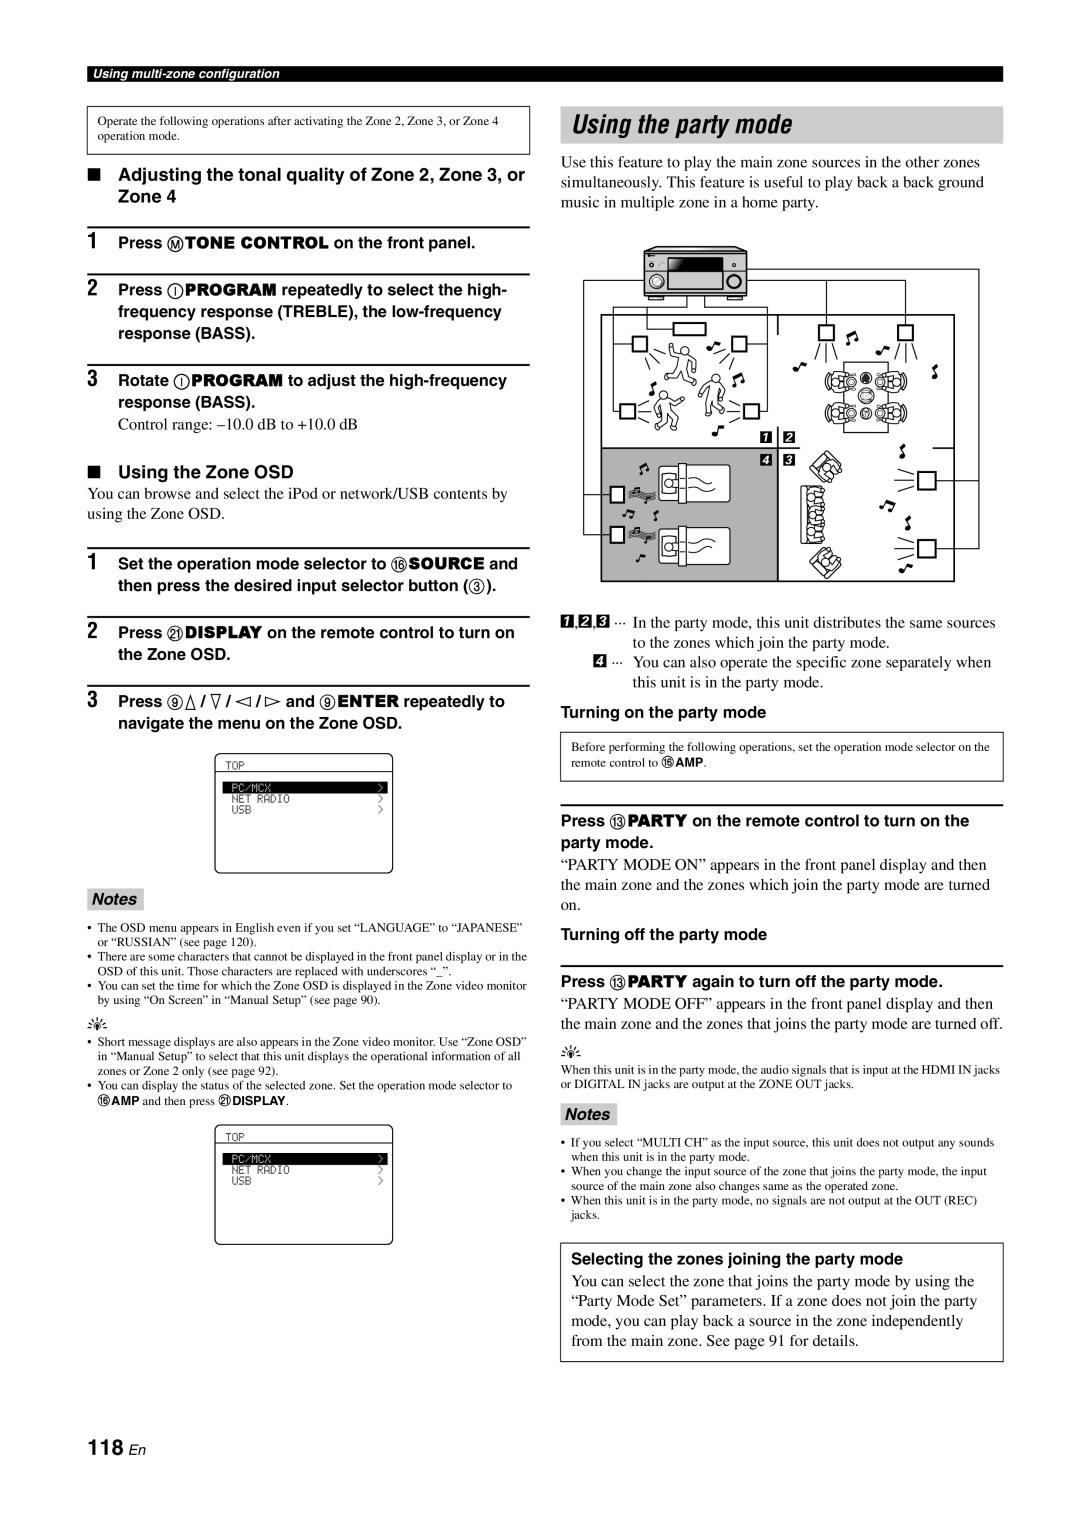 Yamaha DSP-Z11 owner manual Using the party mode, 118 En, Using the Zone OSD, Notes 